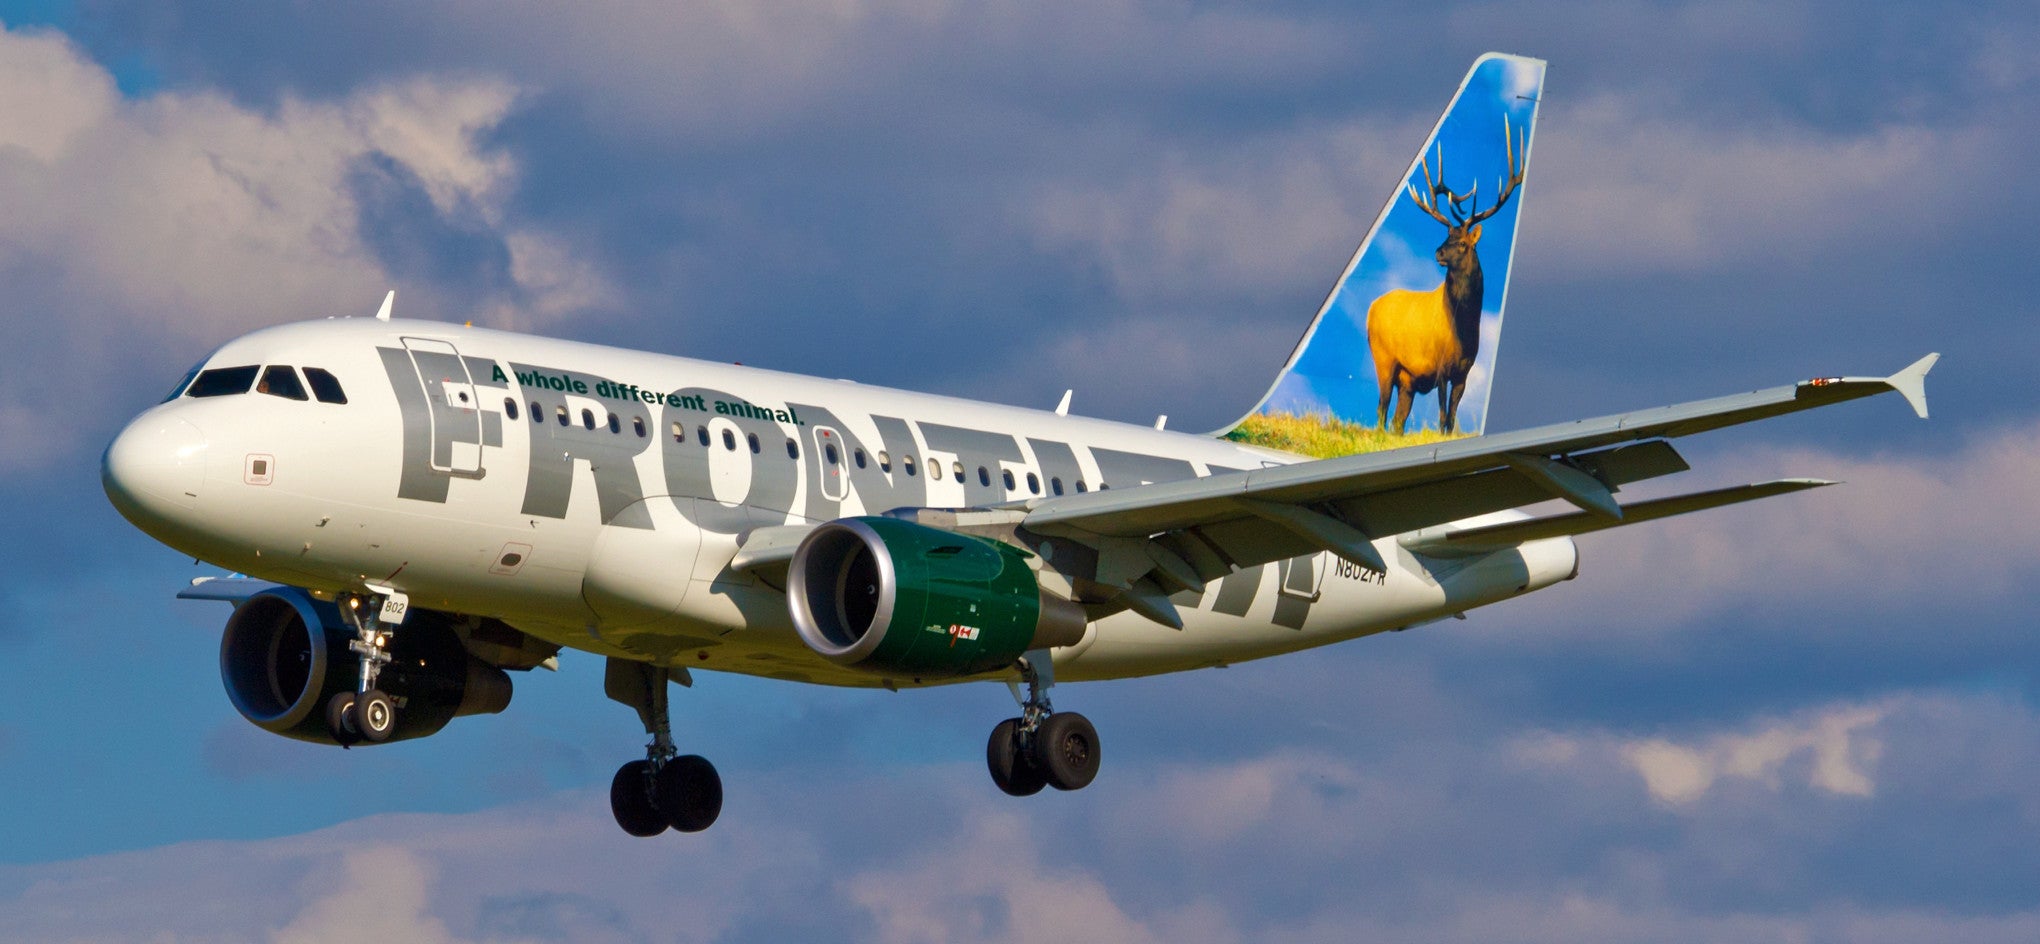 Frontier Airlines Boarding Process & Zones Ultimate Guide [2021]